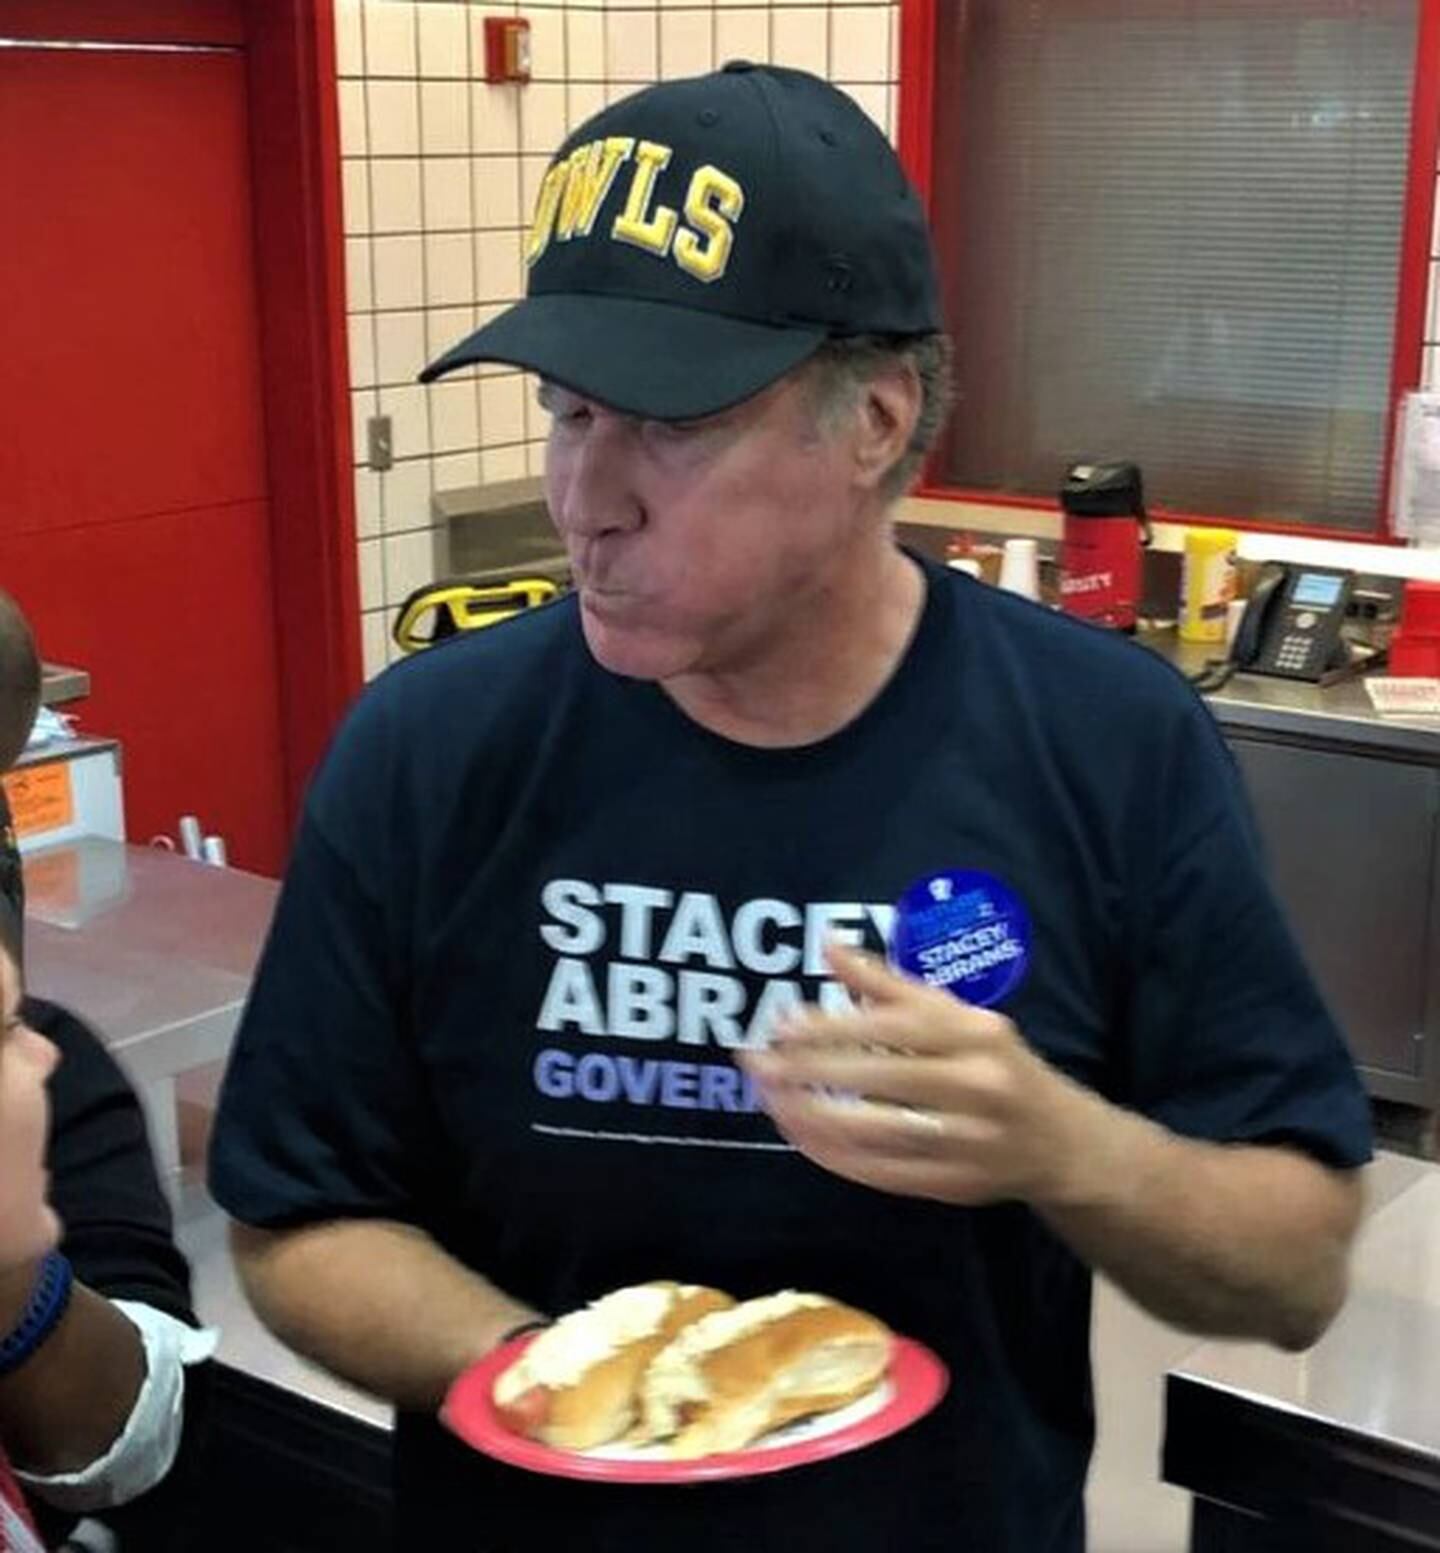 Comedian Will Ferrell stops for a hotdog while campaigning for Stacey Abrams at Kennesaw State University in northwest Georgia. Photo: Kennesaw State University